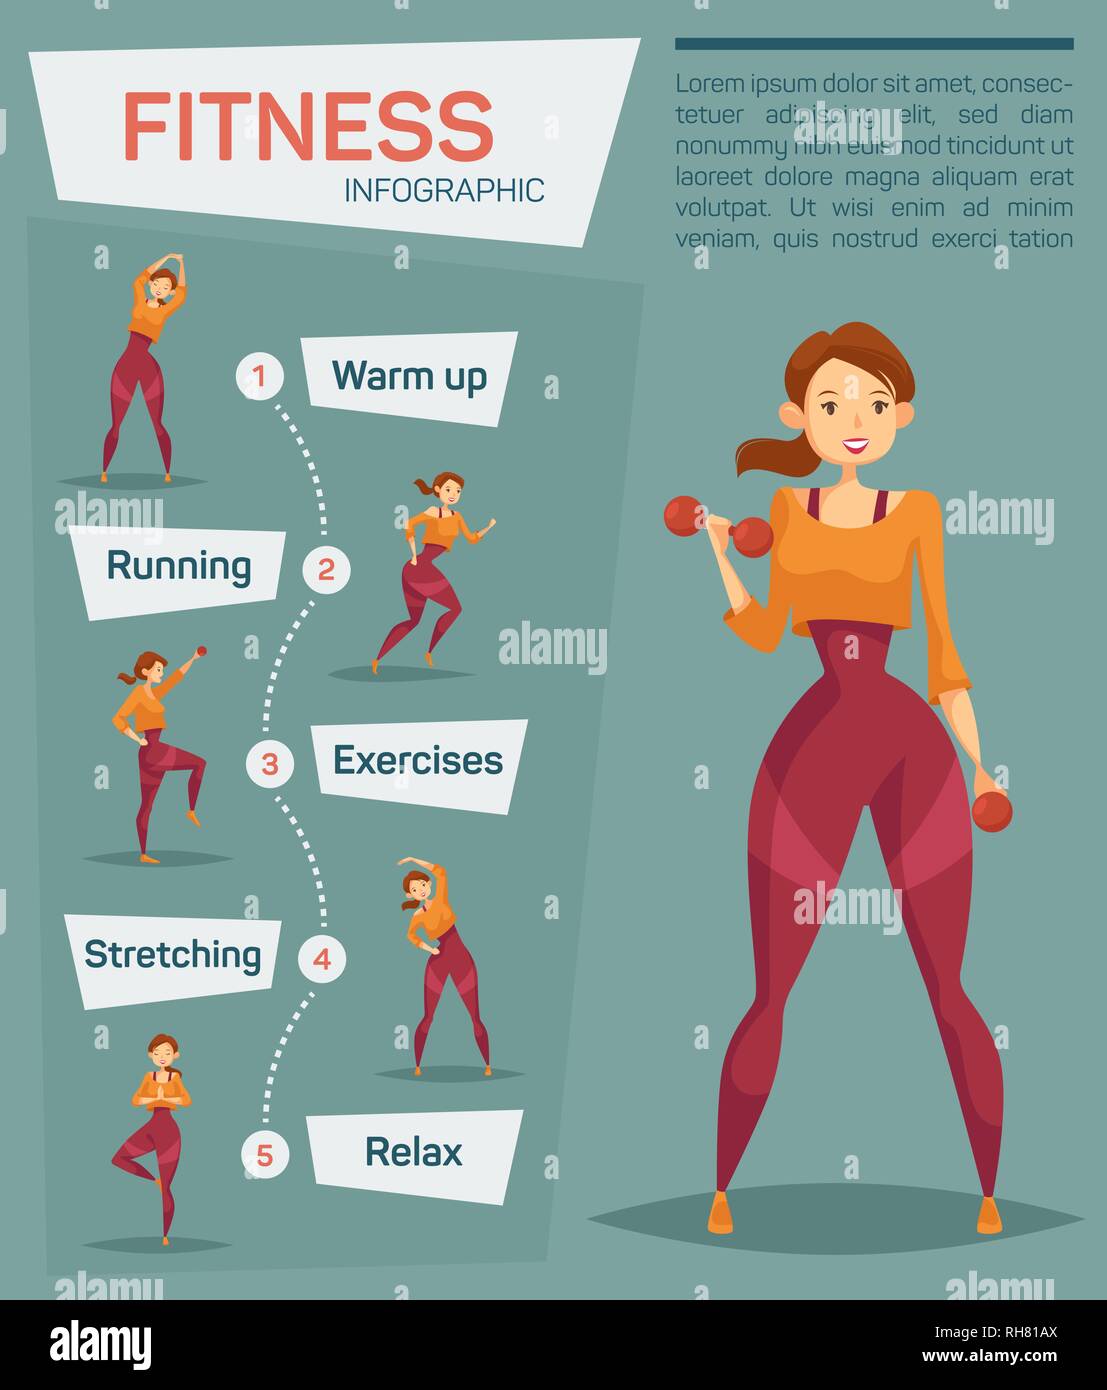 Summer Fitness Trends #Infographic - Visualistan